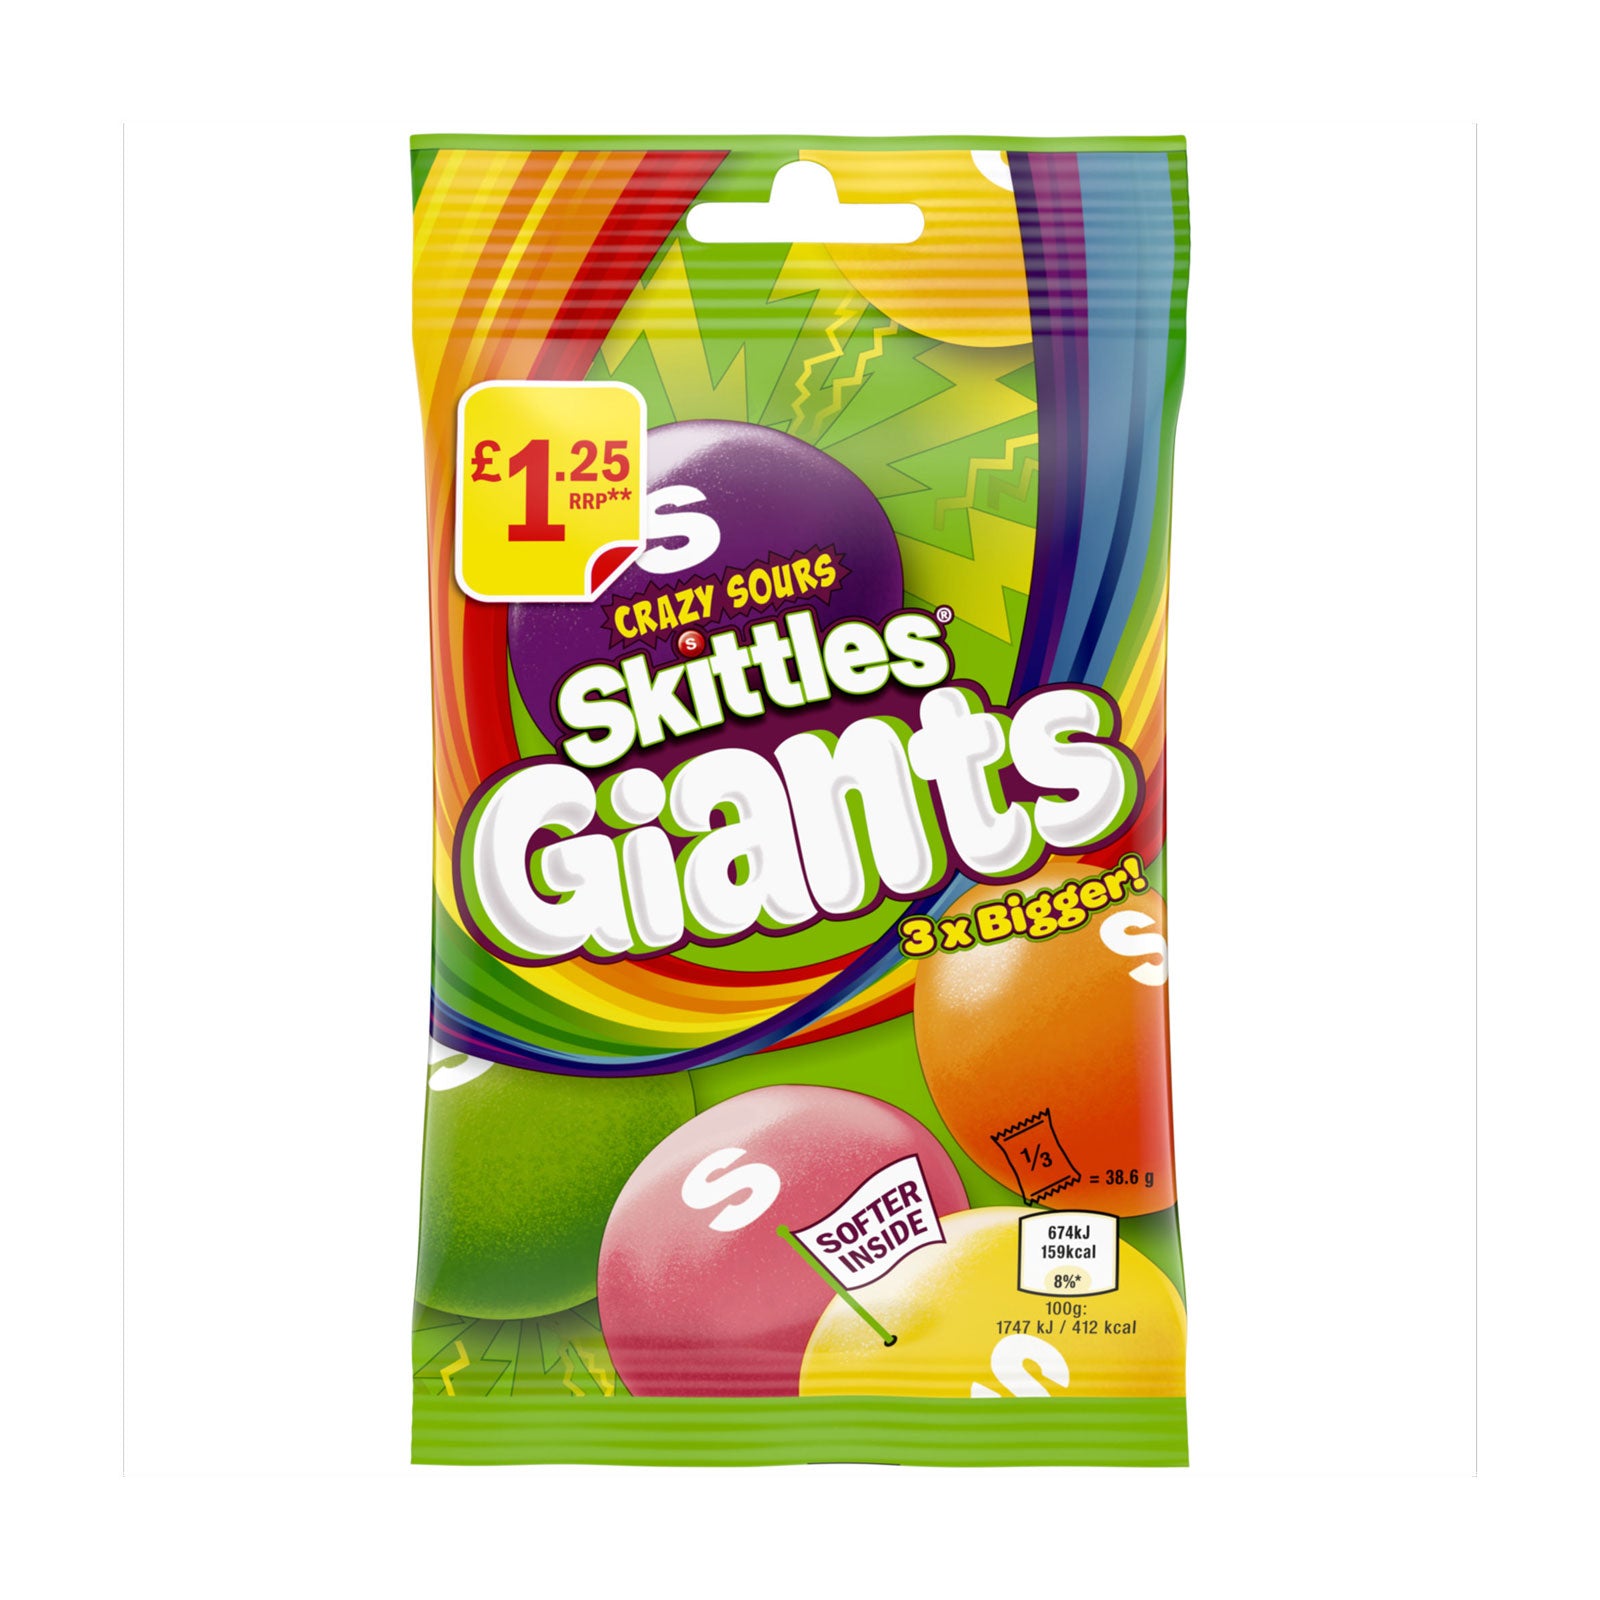 Skittles Pouch Giants Crazy Sour 3 x Bigger 116g 18/11/24